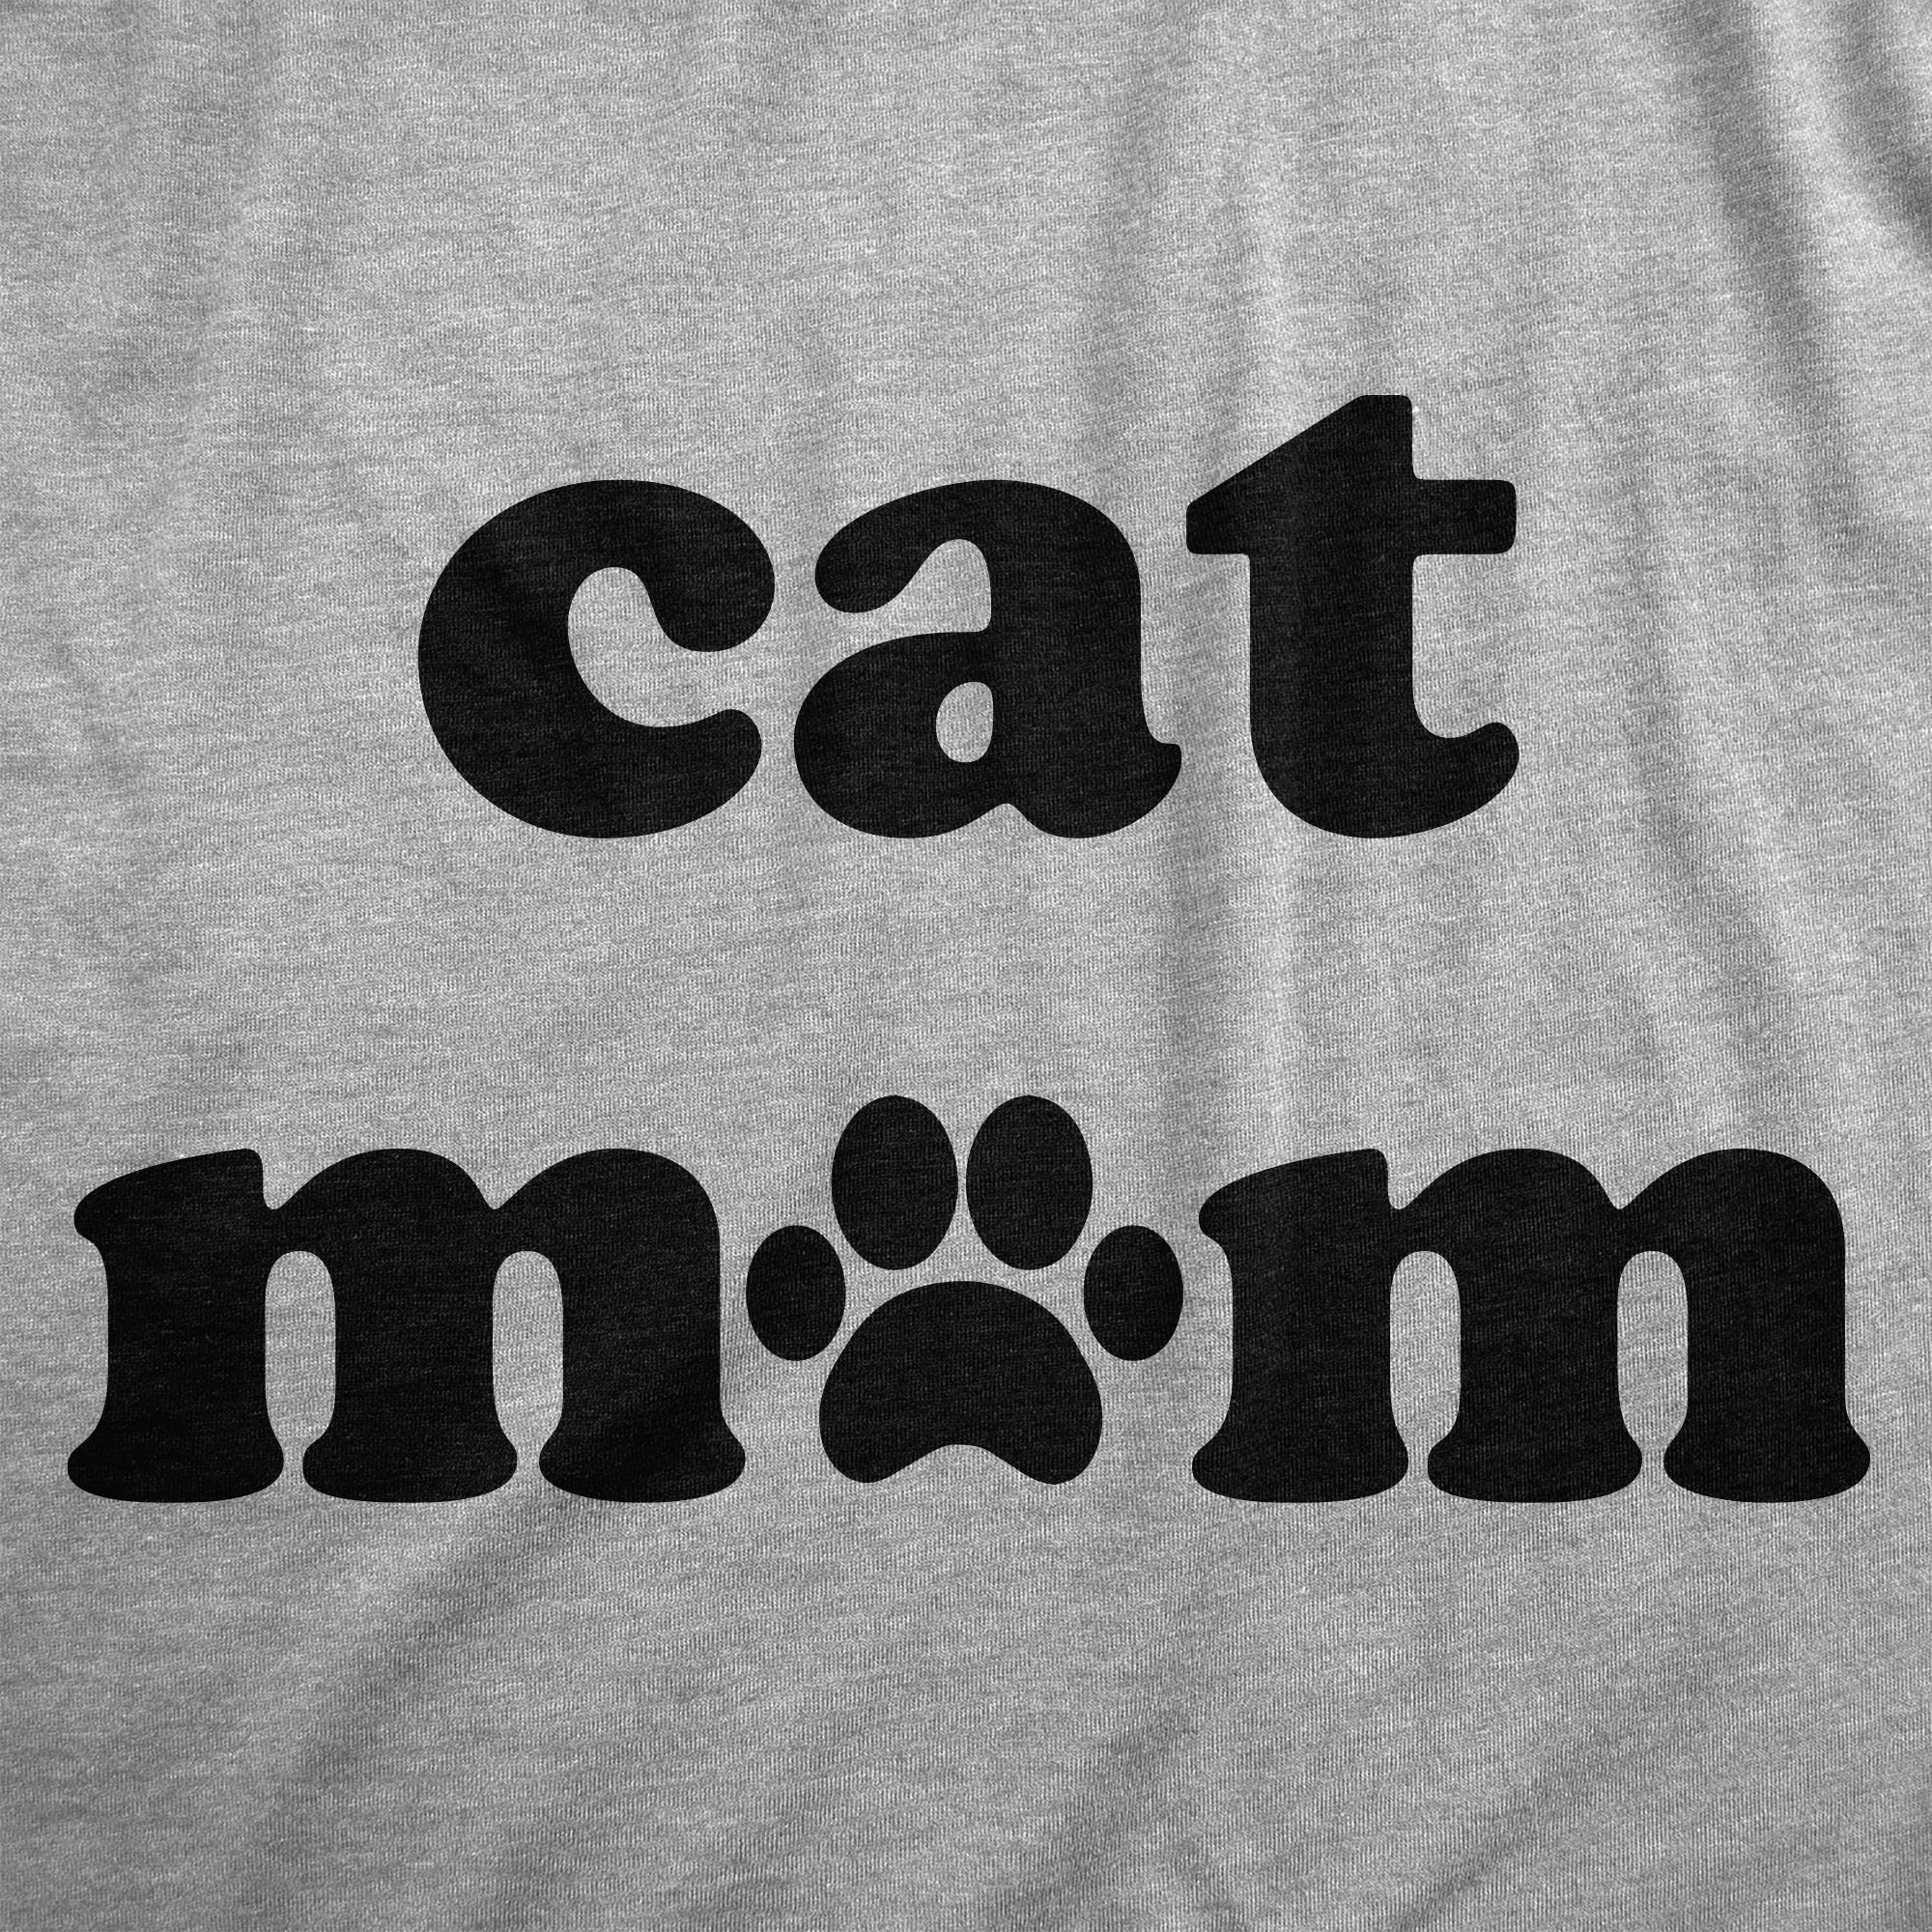 Funny Light Heather Grey - Cat Mom Cat Mom Womens T Shirt Nerdy Mother's Day Cat Tee